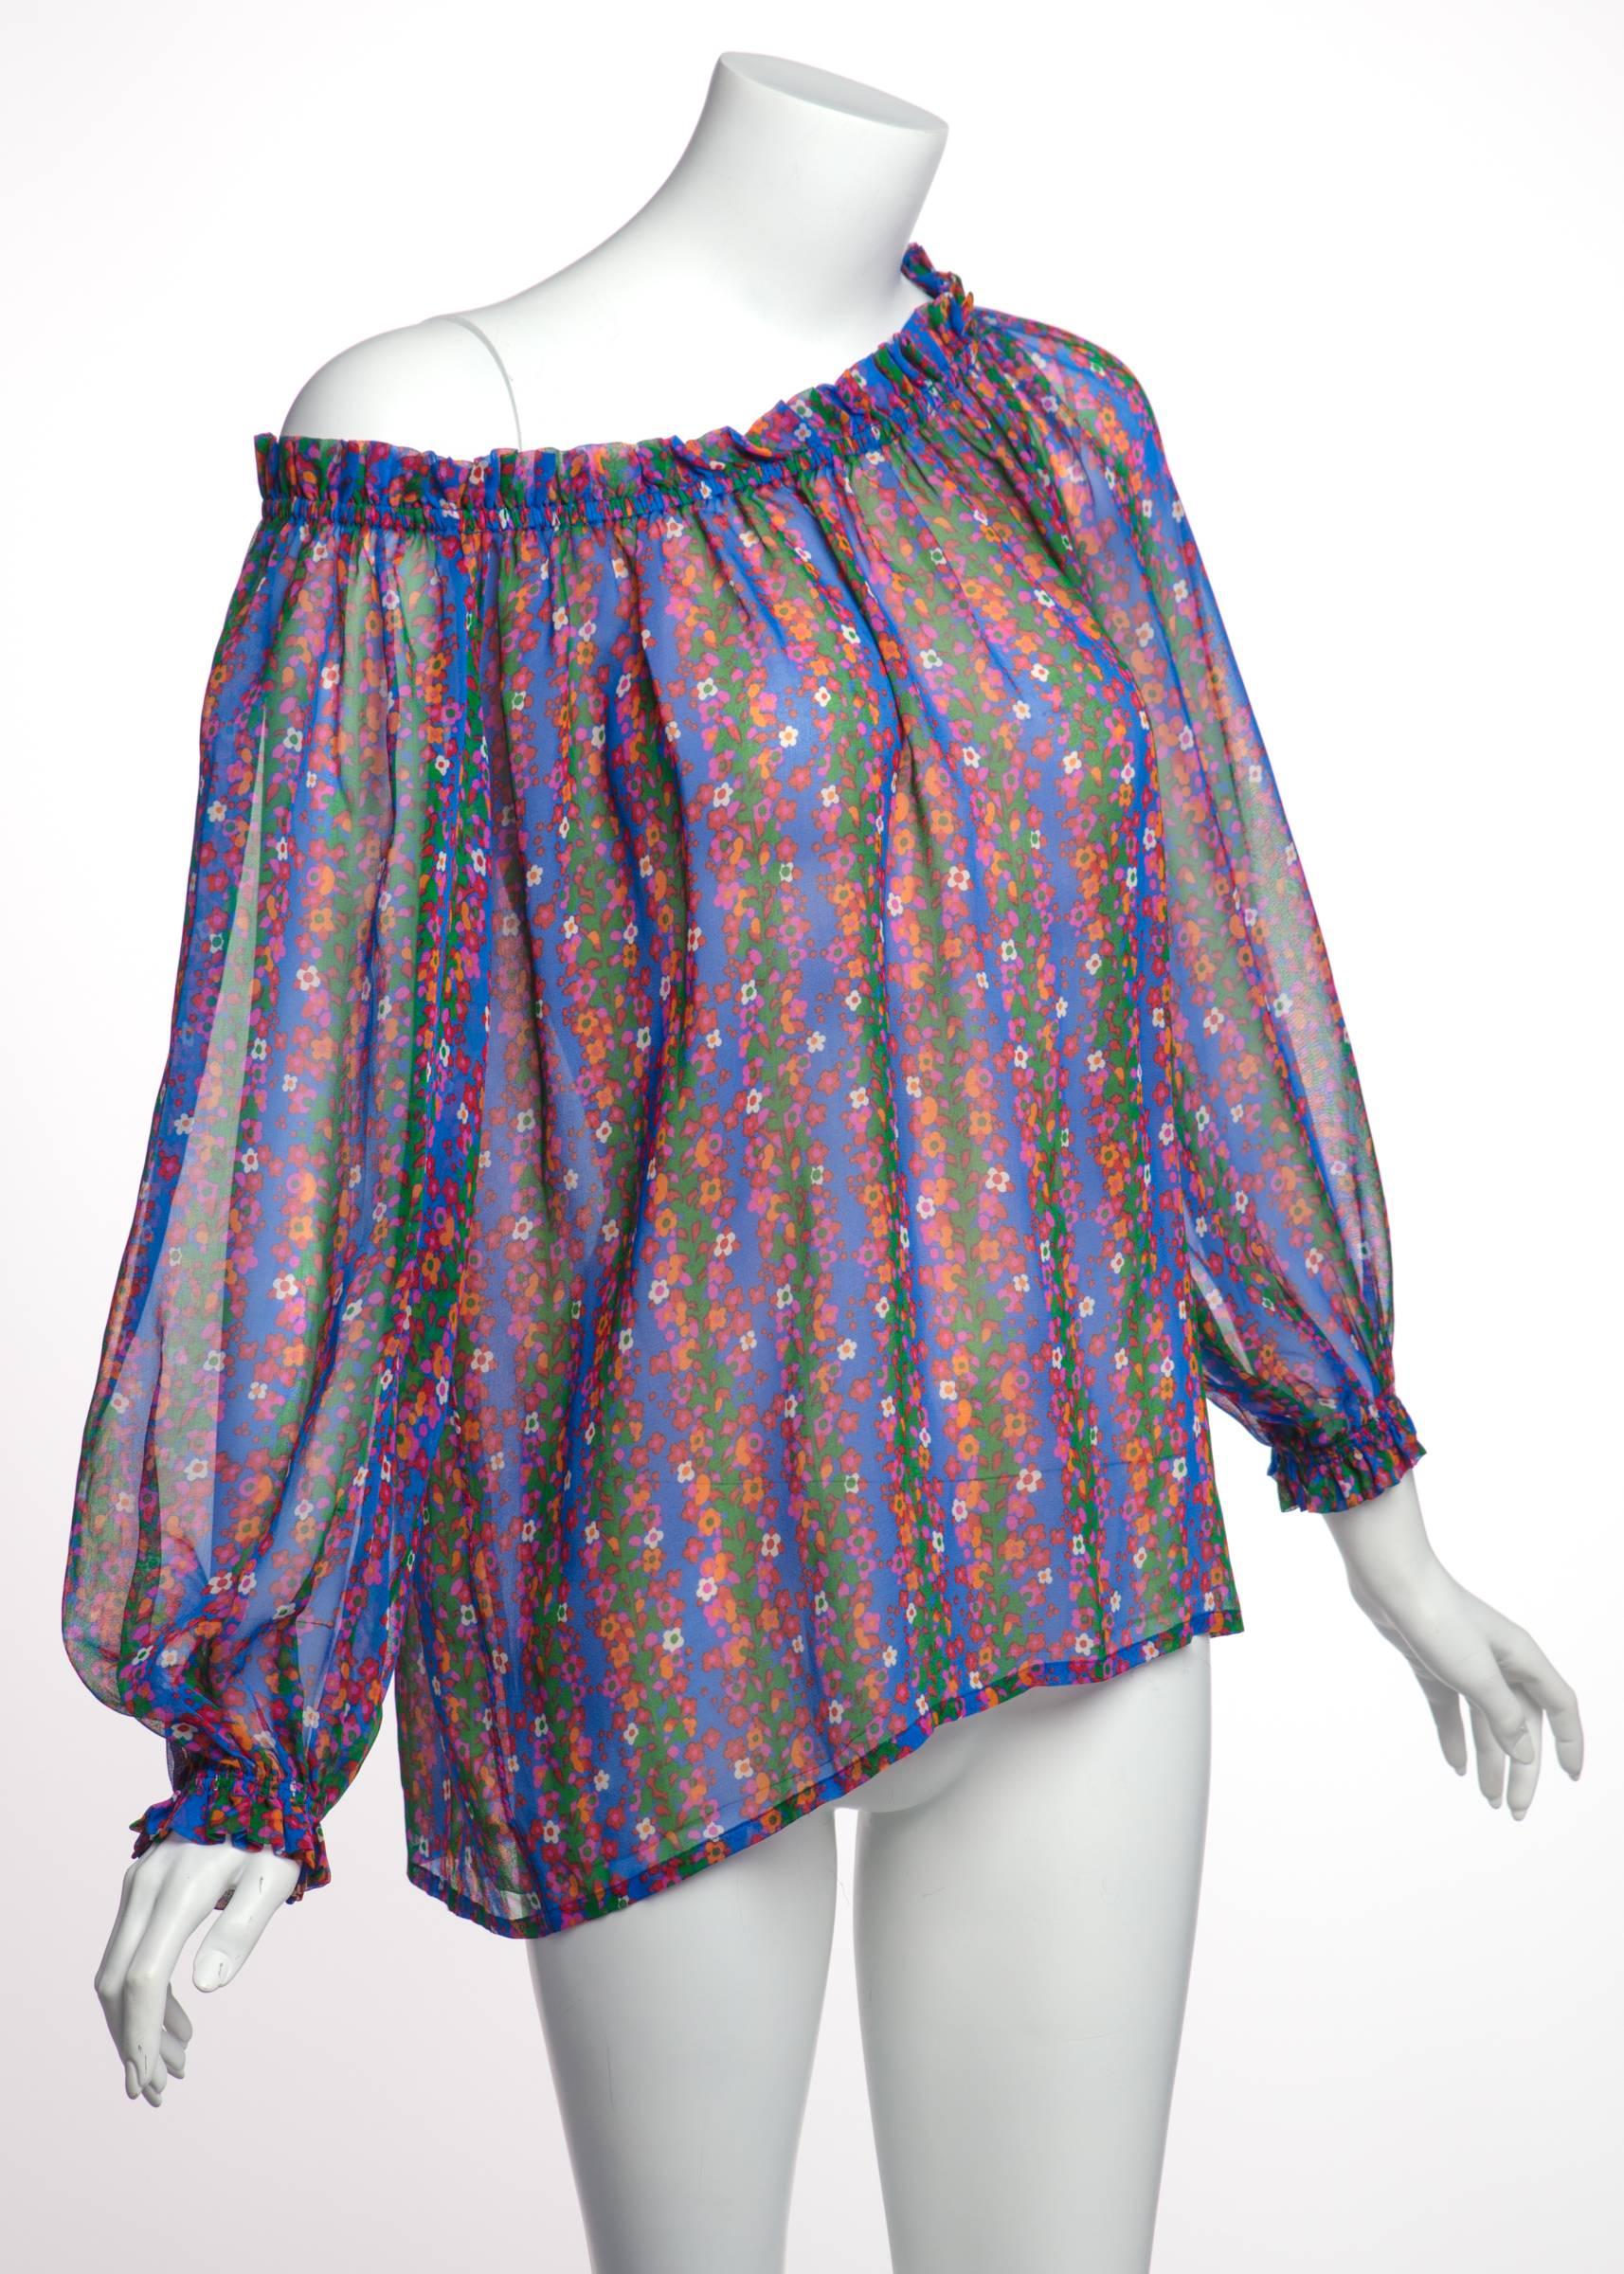 Yves Saint Laurent dominated the runway during the 1970s. His bohemian-chic styles delighted those who had waning interest in the sharp lines of 1960s mod fashion. This silk chiffon blouse features a dense print of blue and green vertical stripes